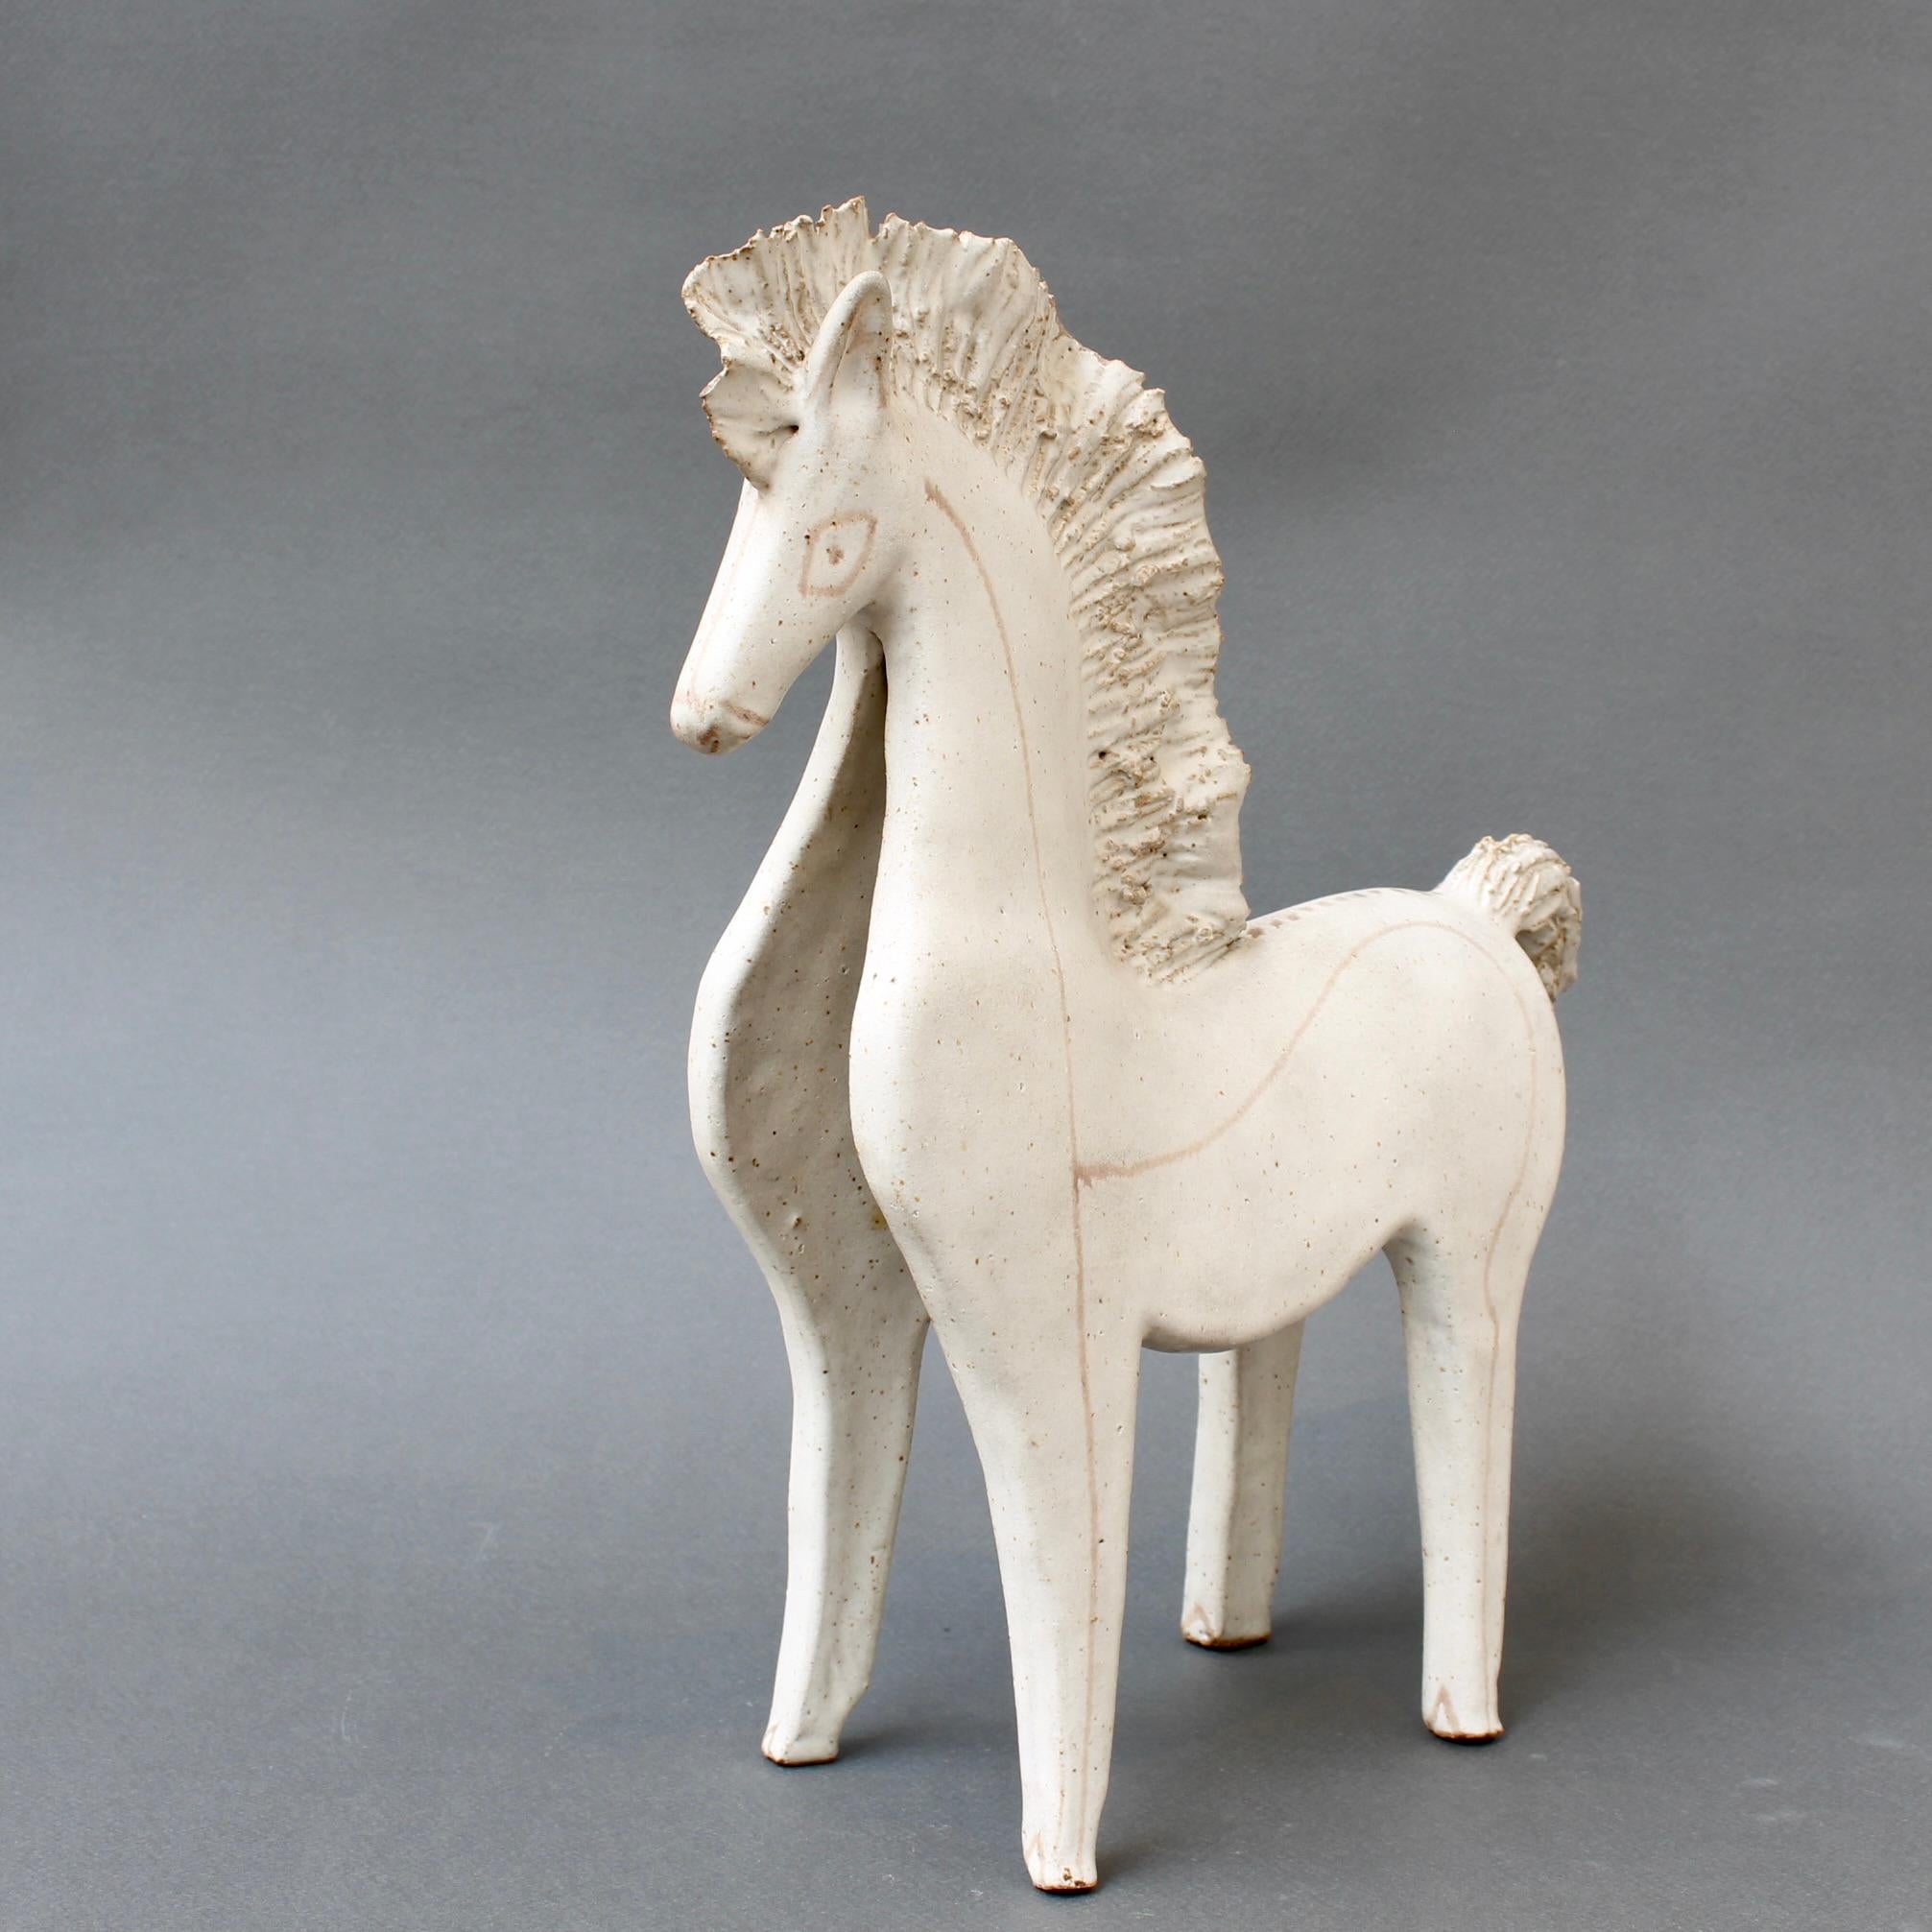 Vintage Ceramic Horse by Bruno Gambone (circa 1970s) - Large For Sale 5